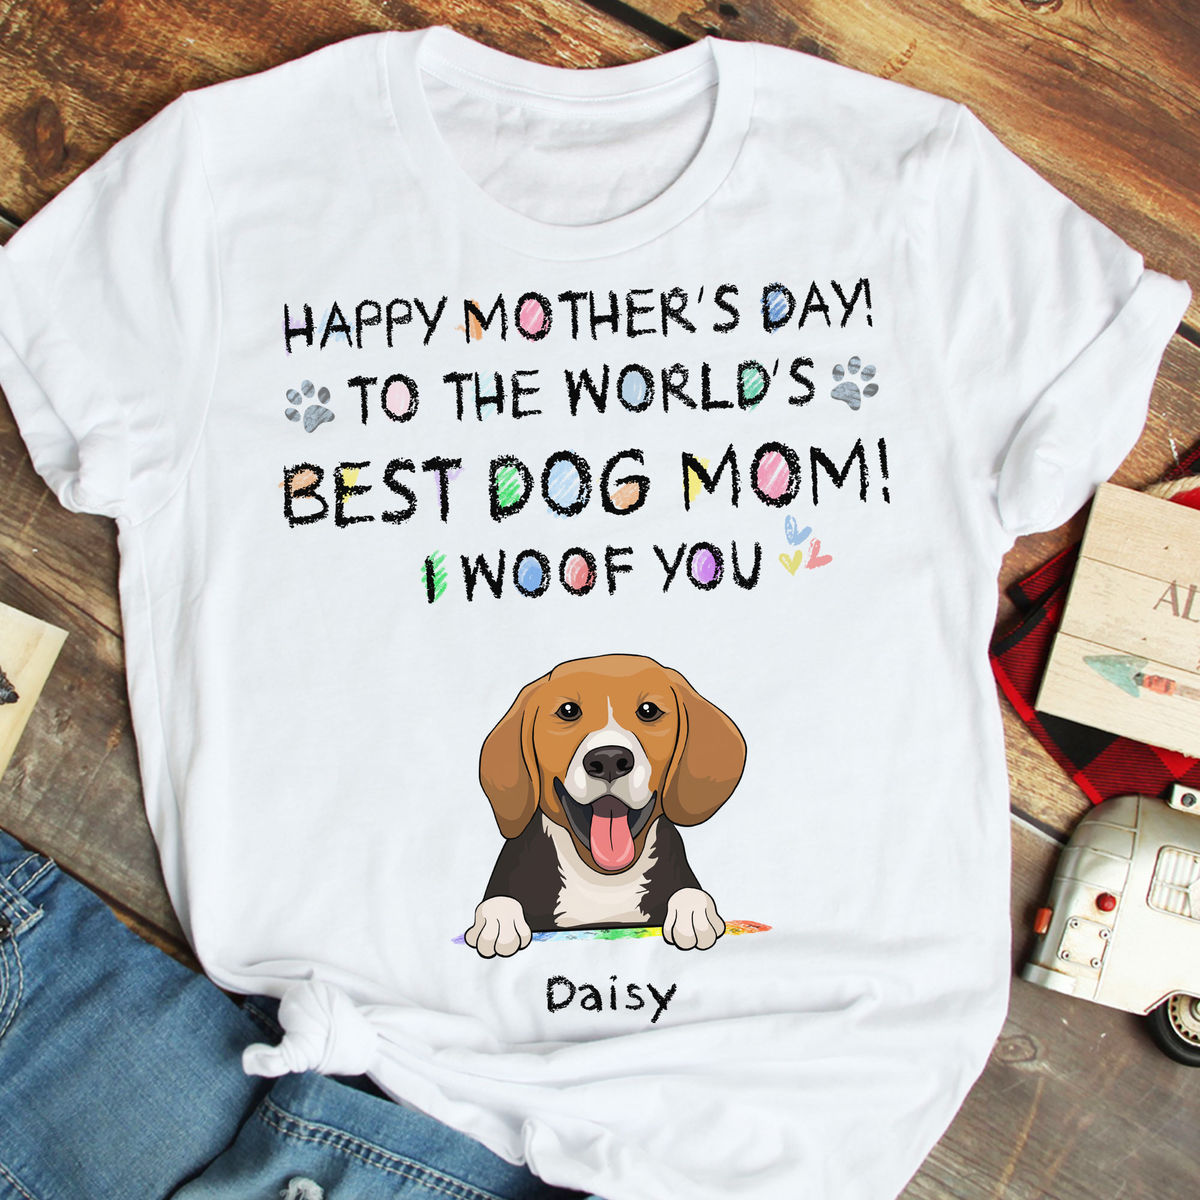 Personalized Shirt - Dog Mom Shirt - Happy Mother's Day to the world's Best Dog Mom - We Woof You - Mother's Day Gifts, Gifts For Mother